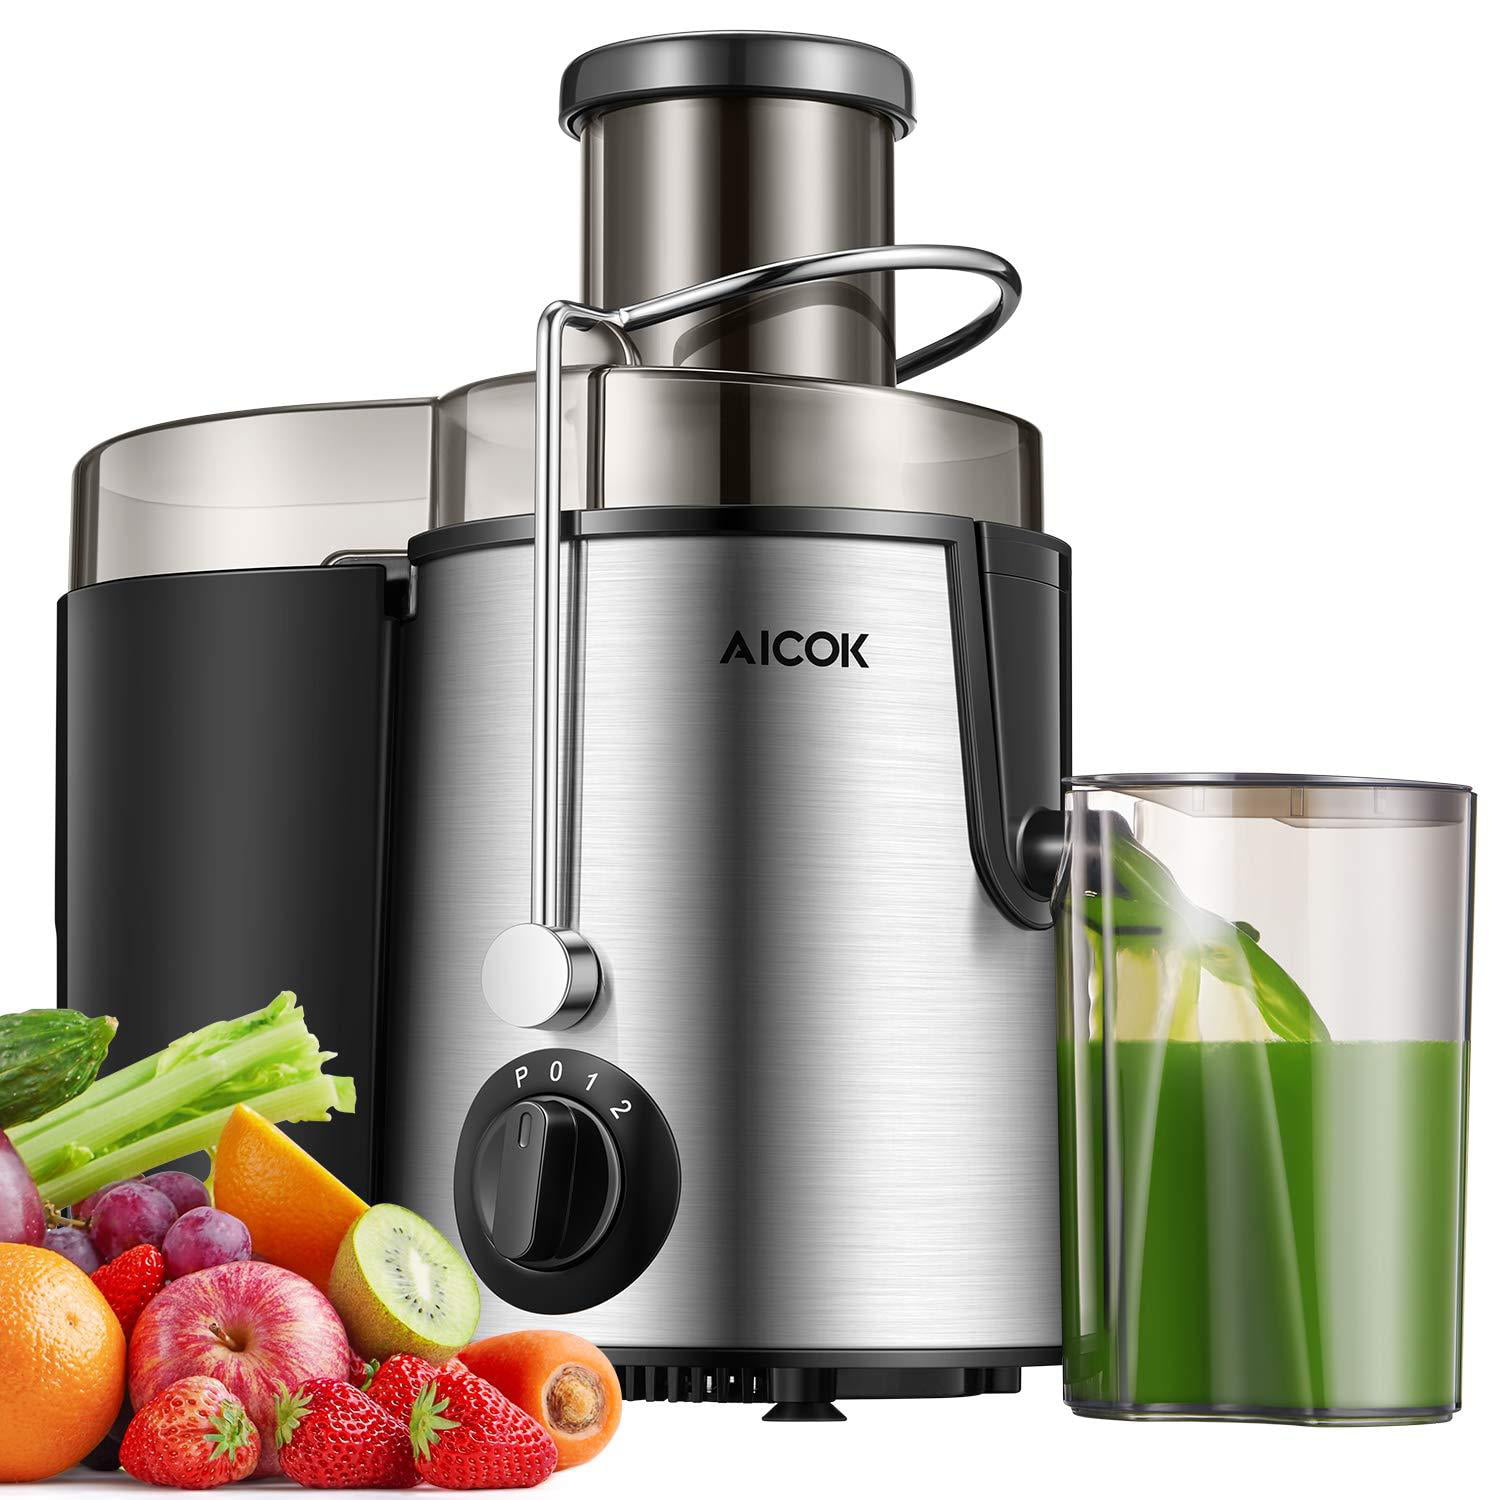 Anti-drip BPA-Free,AICOK Juicer Centrifugal Juicer Machine Wide 3” Feed Chute Juice Extractor for Whole Fruit and Vegetables Stainless Steel Juicer with Pulse Function and Multi Speed Control 